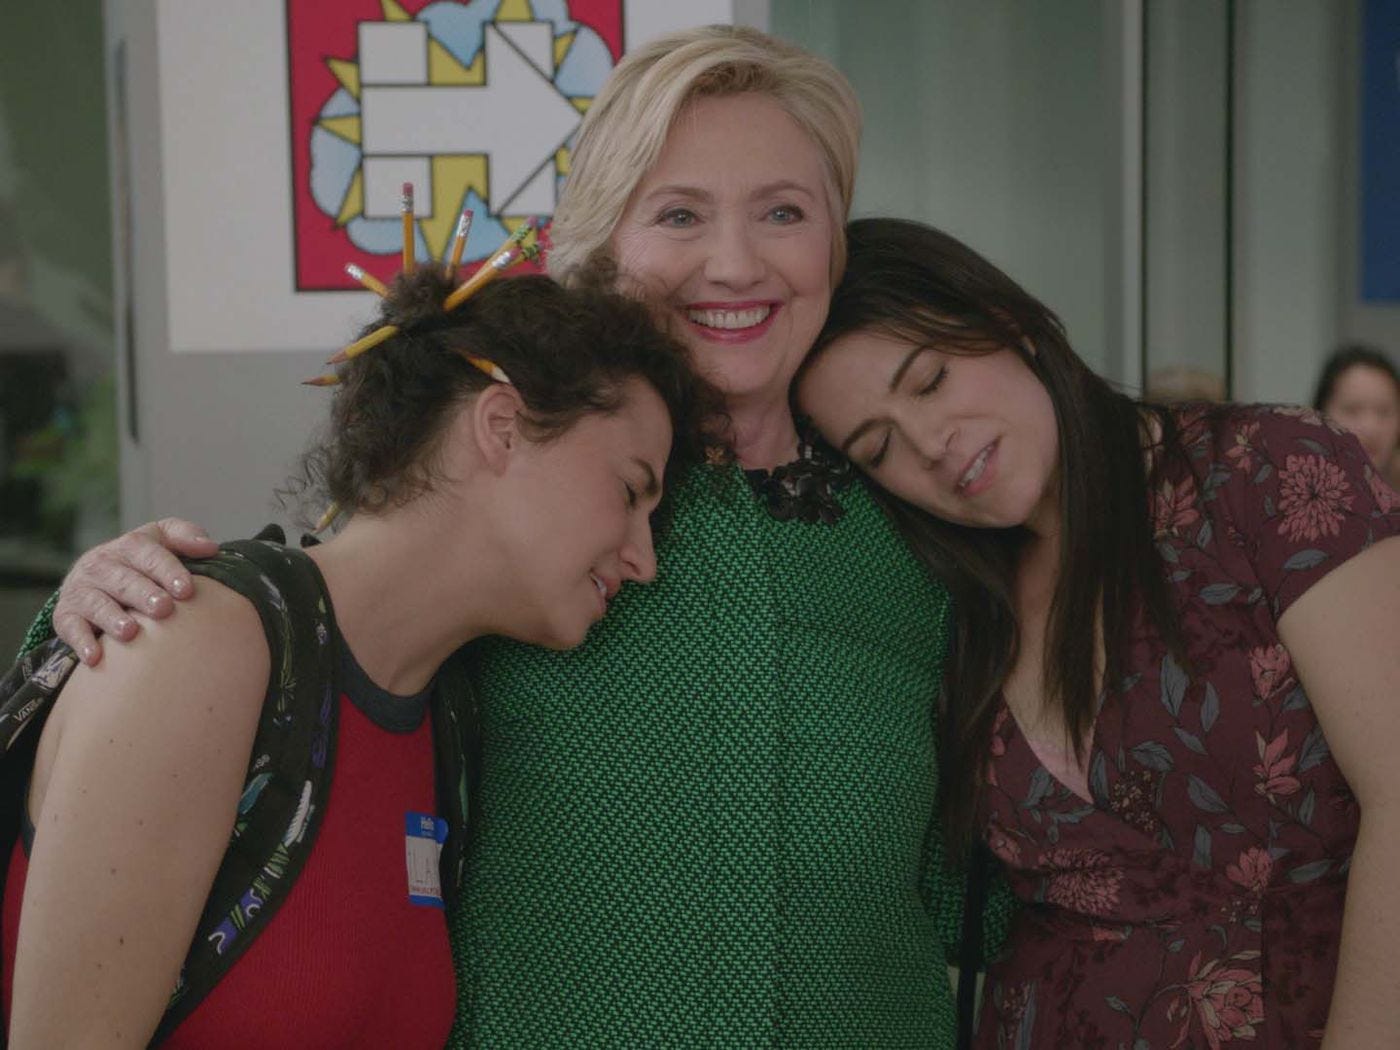 Watch: Hillary Clinton's surreal cameo on Broad City - Vox